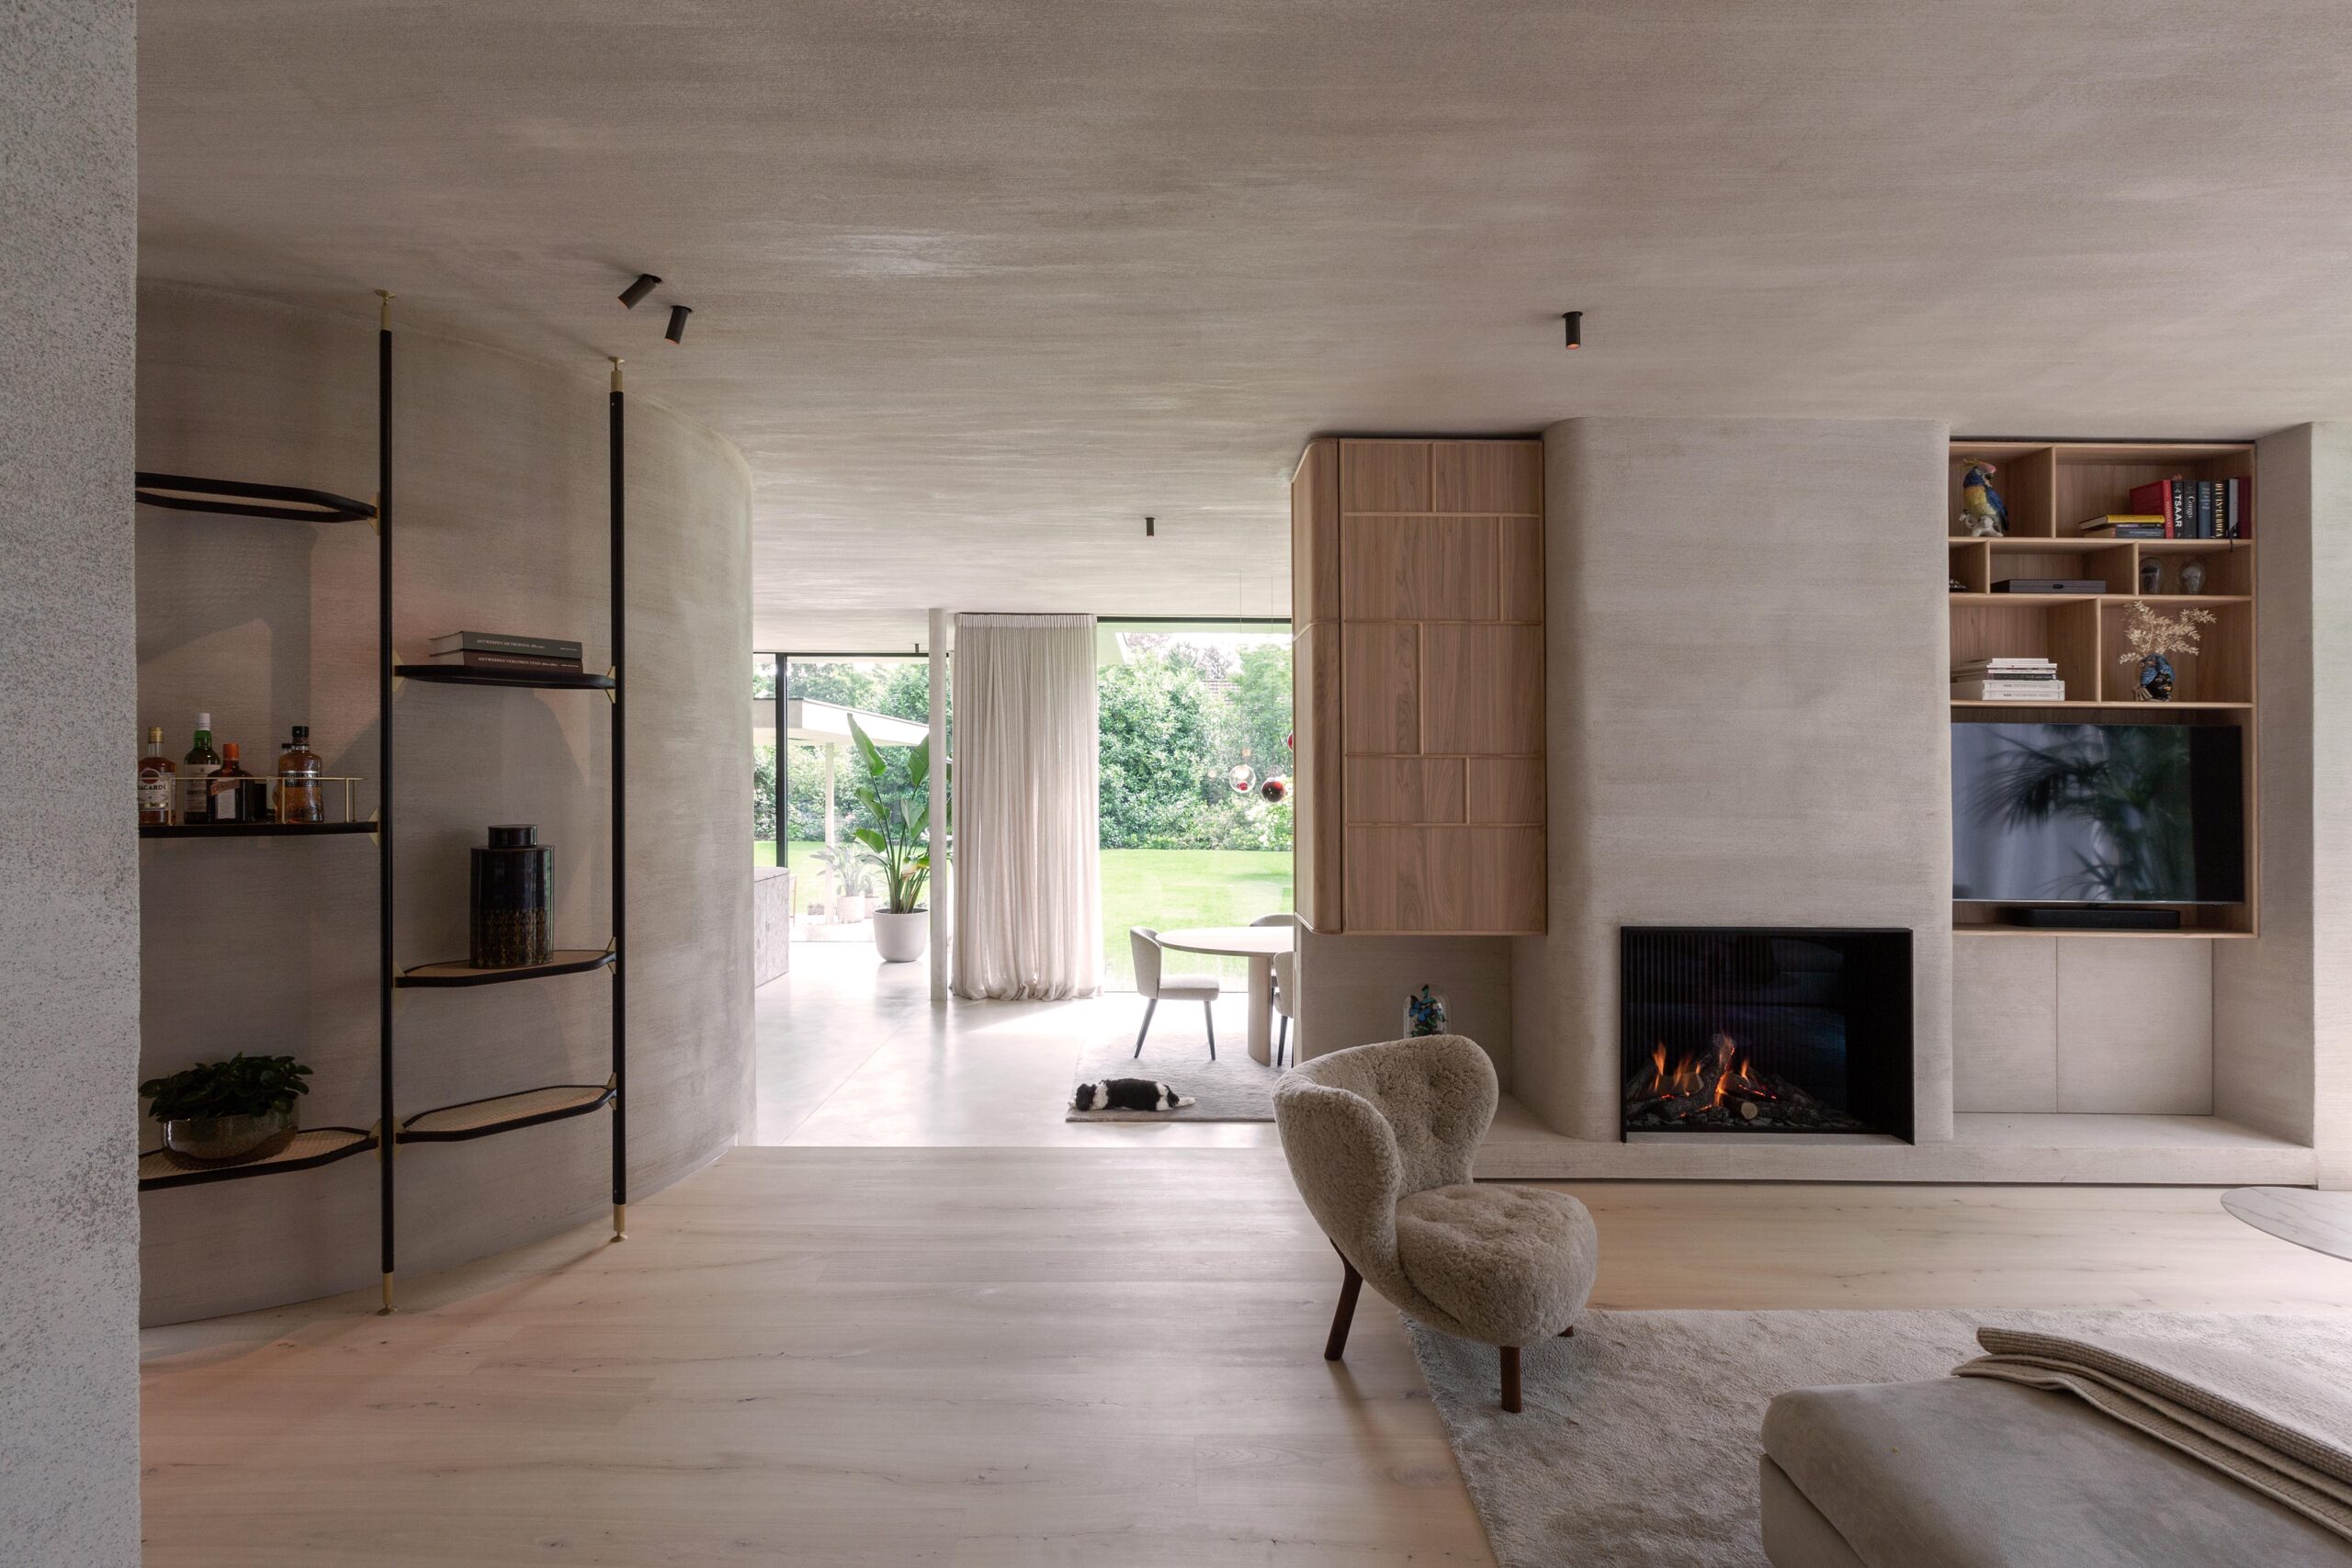 Modern living room with muted tones featuring a fireplace, wooden cabinetry, plush seating, and a view to the garden.